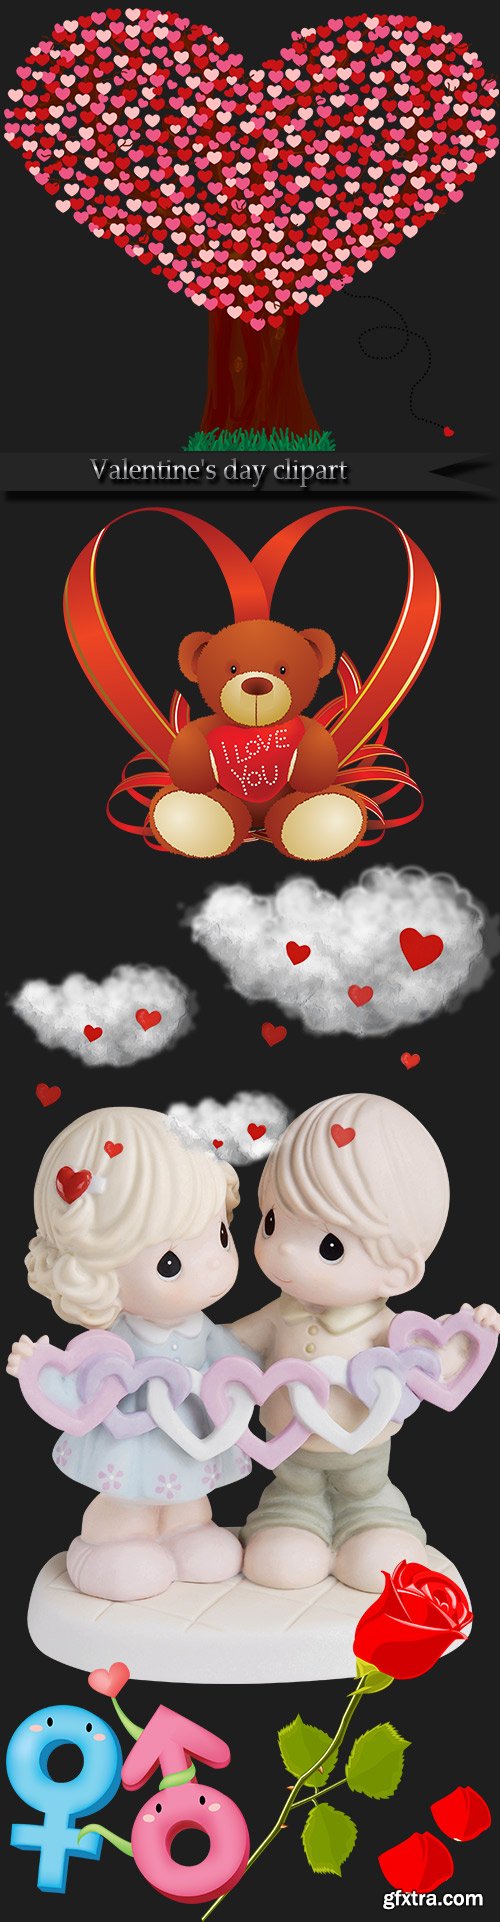 Valentine's day clipart on a transparent background